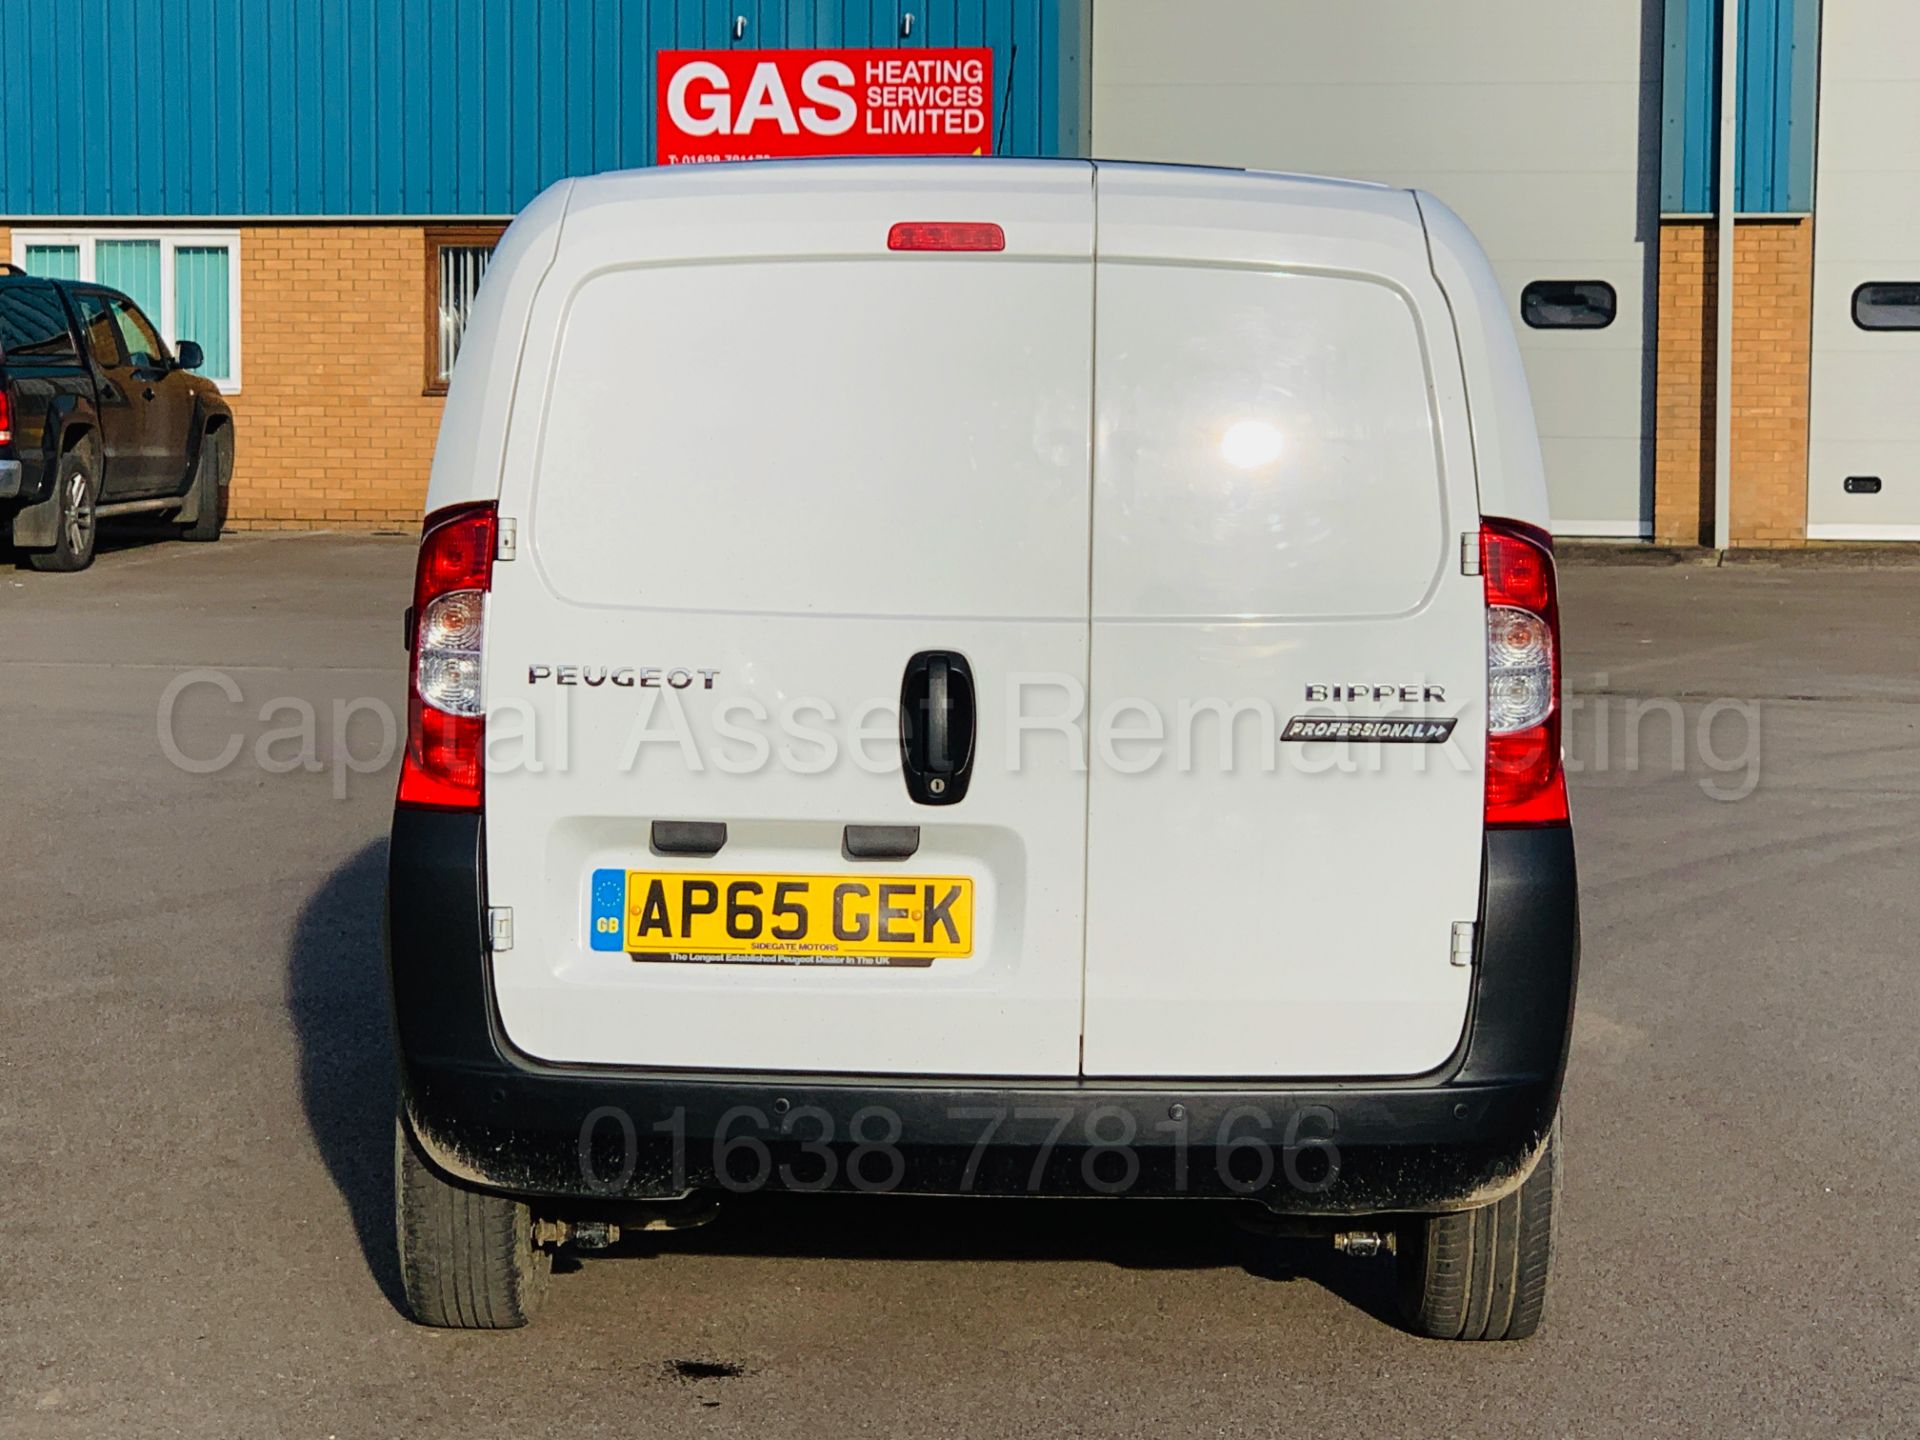 (On Sale) PEUGEOT BIPPER *PROFESSIONAL* LCV - PANEL VAN (65 REG) 'HDI - 5 SPEED' (1 OWNER) *AIR CON* - Image 9 of 36